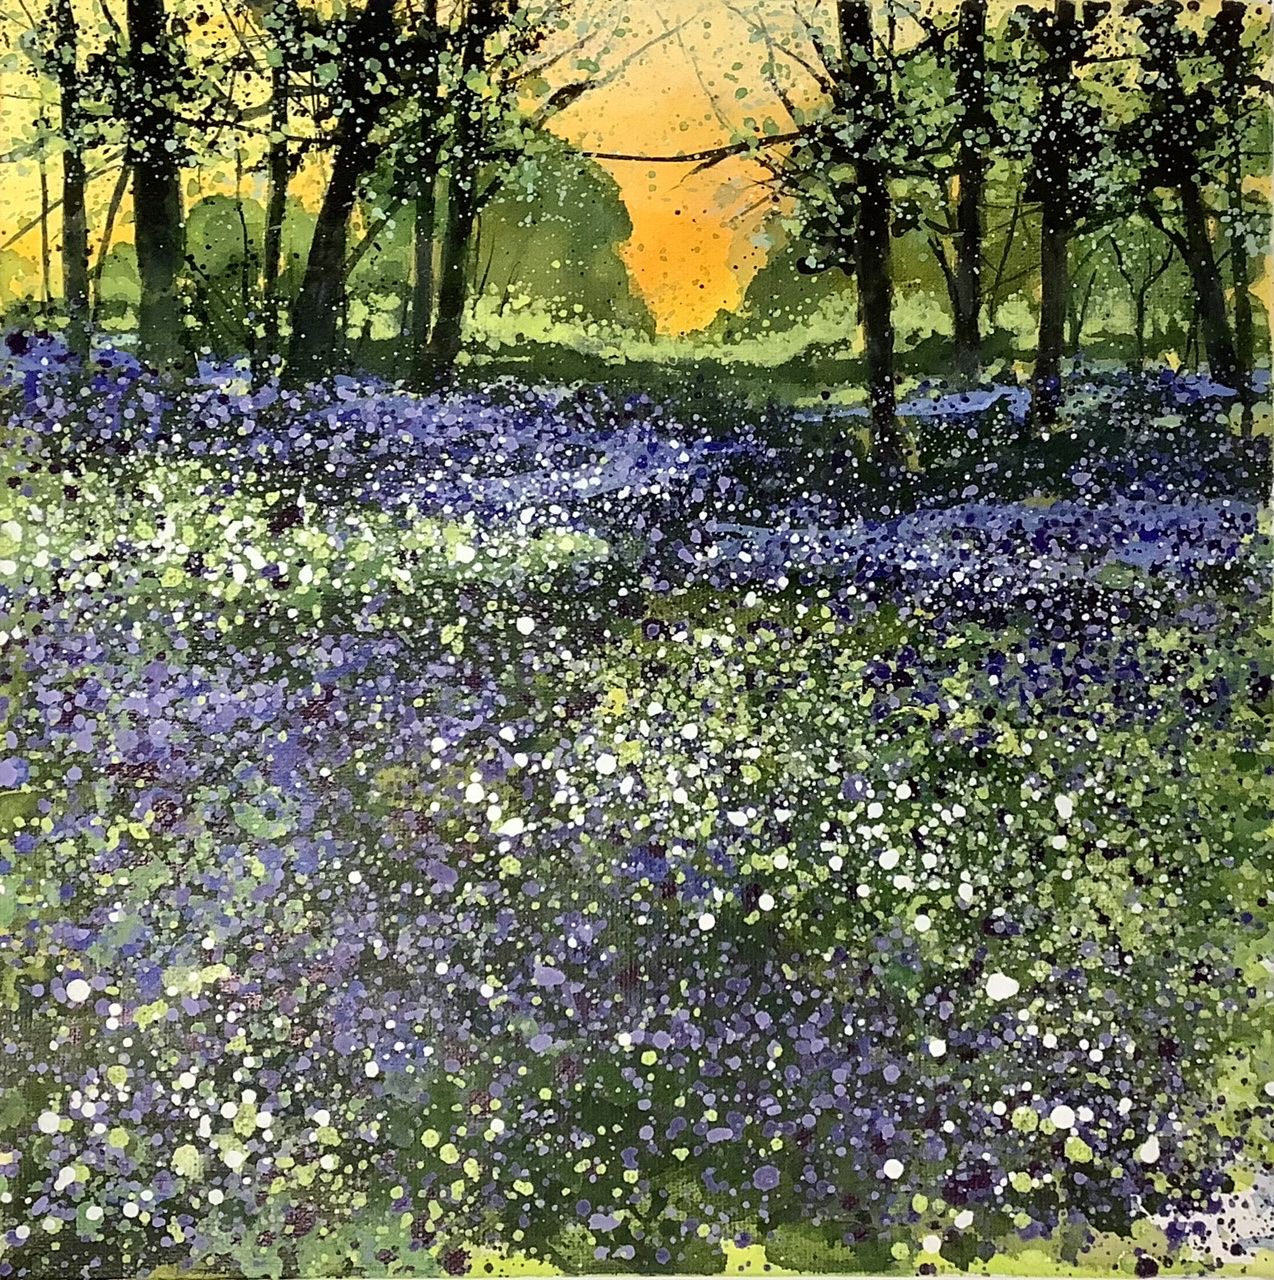 Beyond The Bluebells by Adele Riley